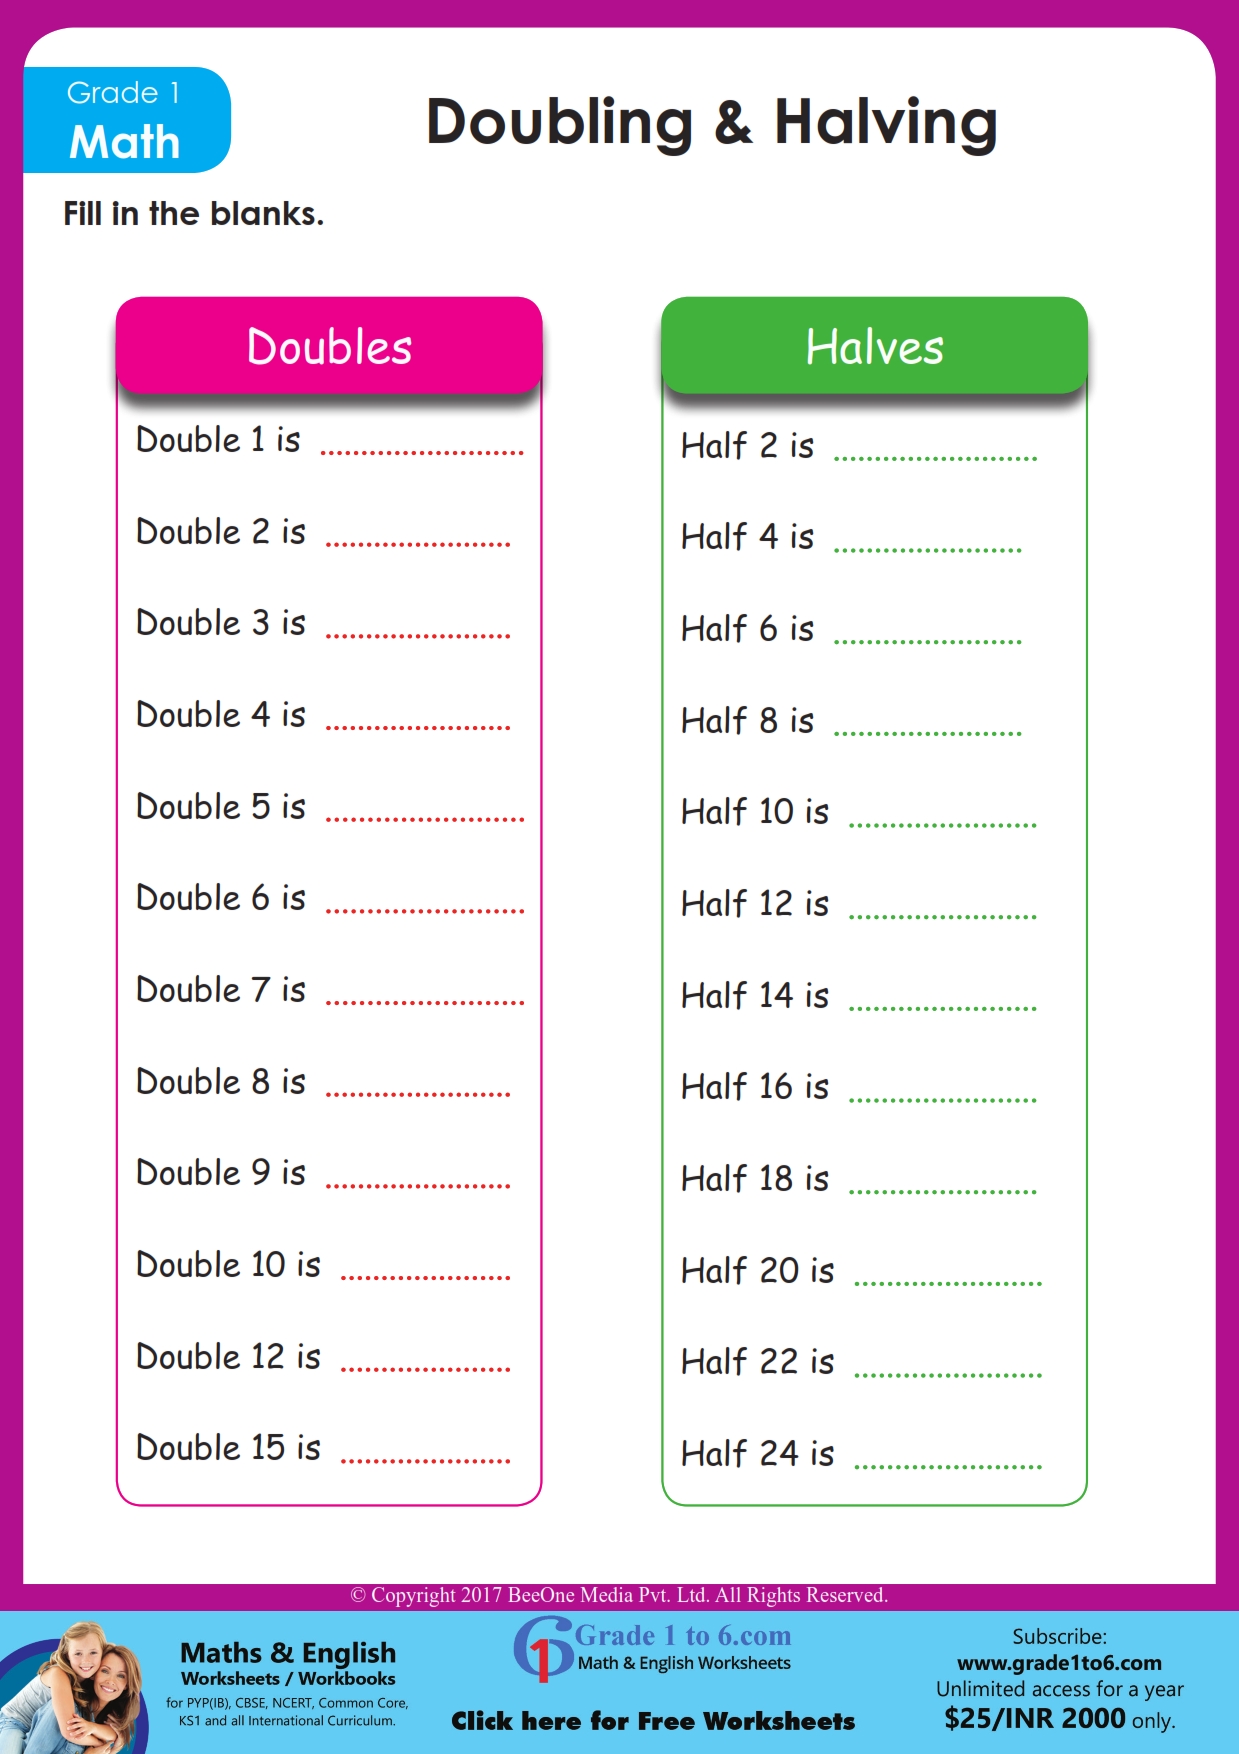 doubling-and-halving-worksheets-grade1to6